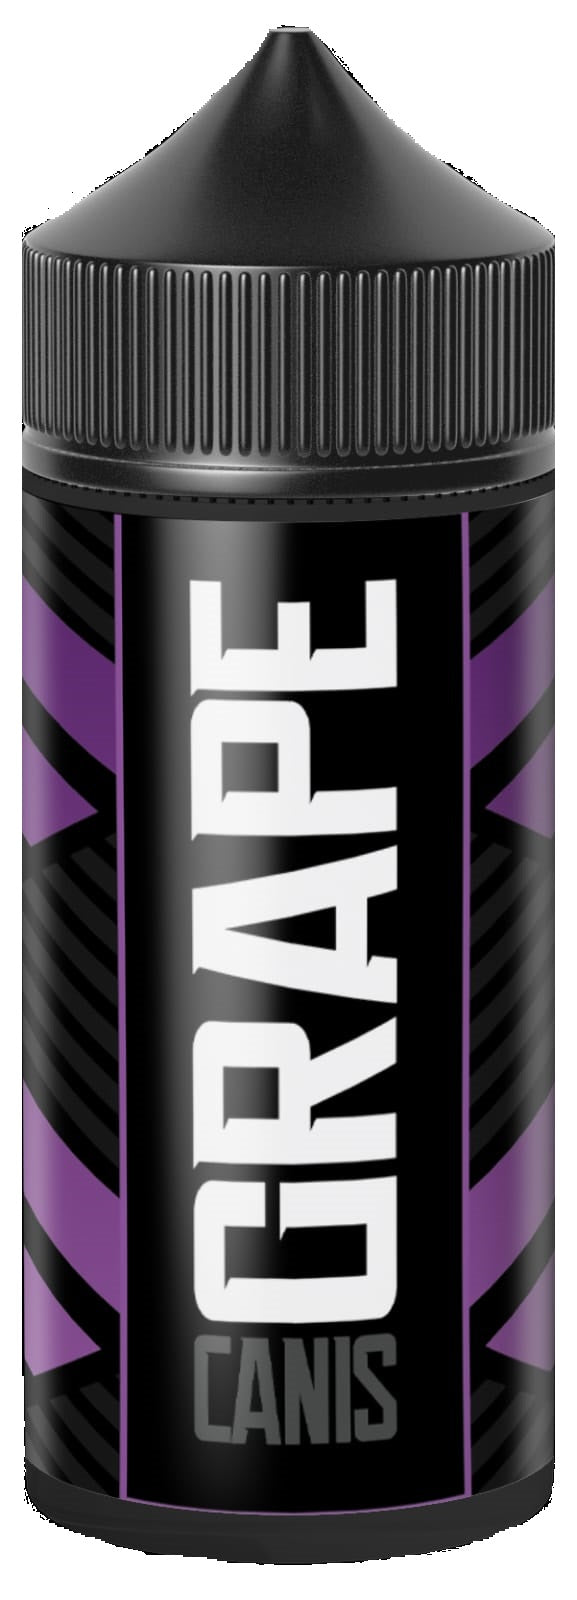 Grape by Canis E-Juice 100ml